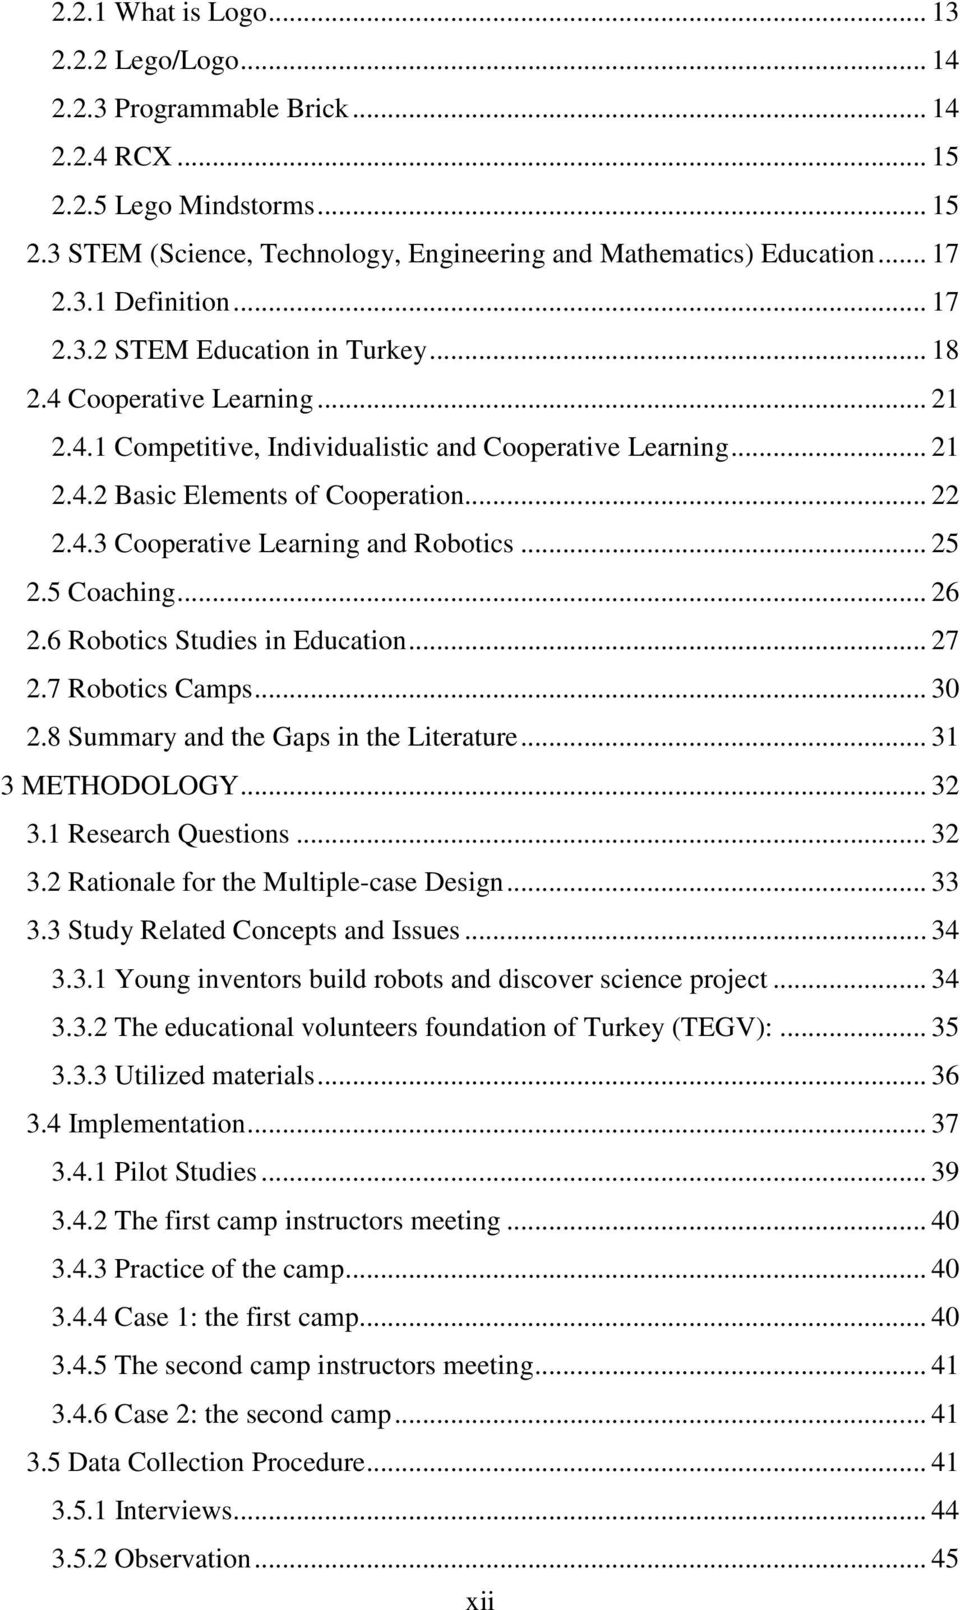 4.3 Cooperative Learning and Robotics... 25 2.5 Coaching... 26 2.6 Robotics Studies in Education... 27 2.7 Robotics Camps... 30 2.8 Summary and the Gaps in the Literature... 31 3 METHODOLOGY... 32 3.